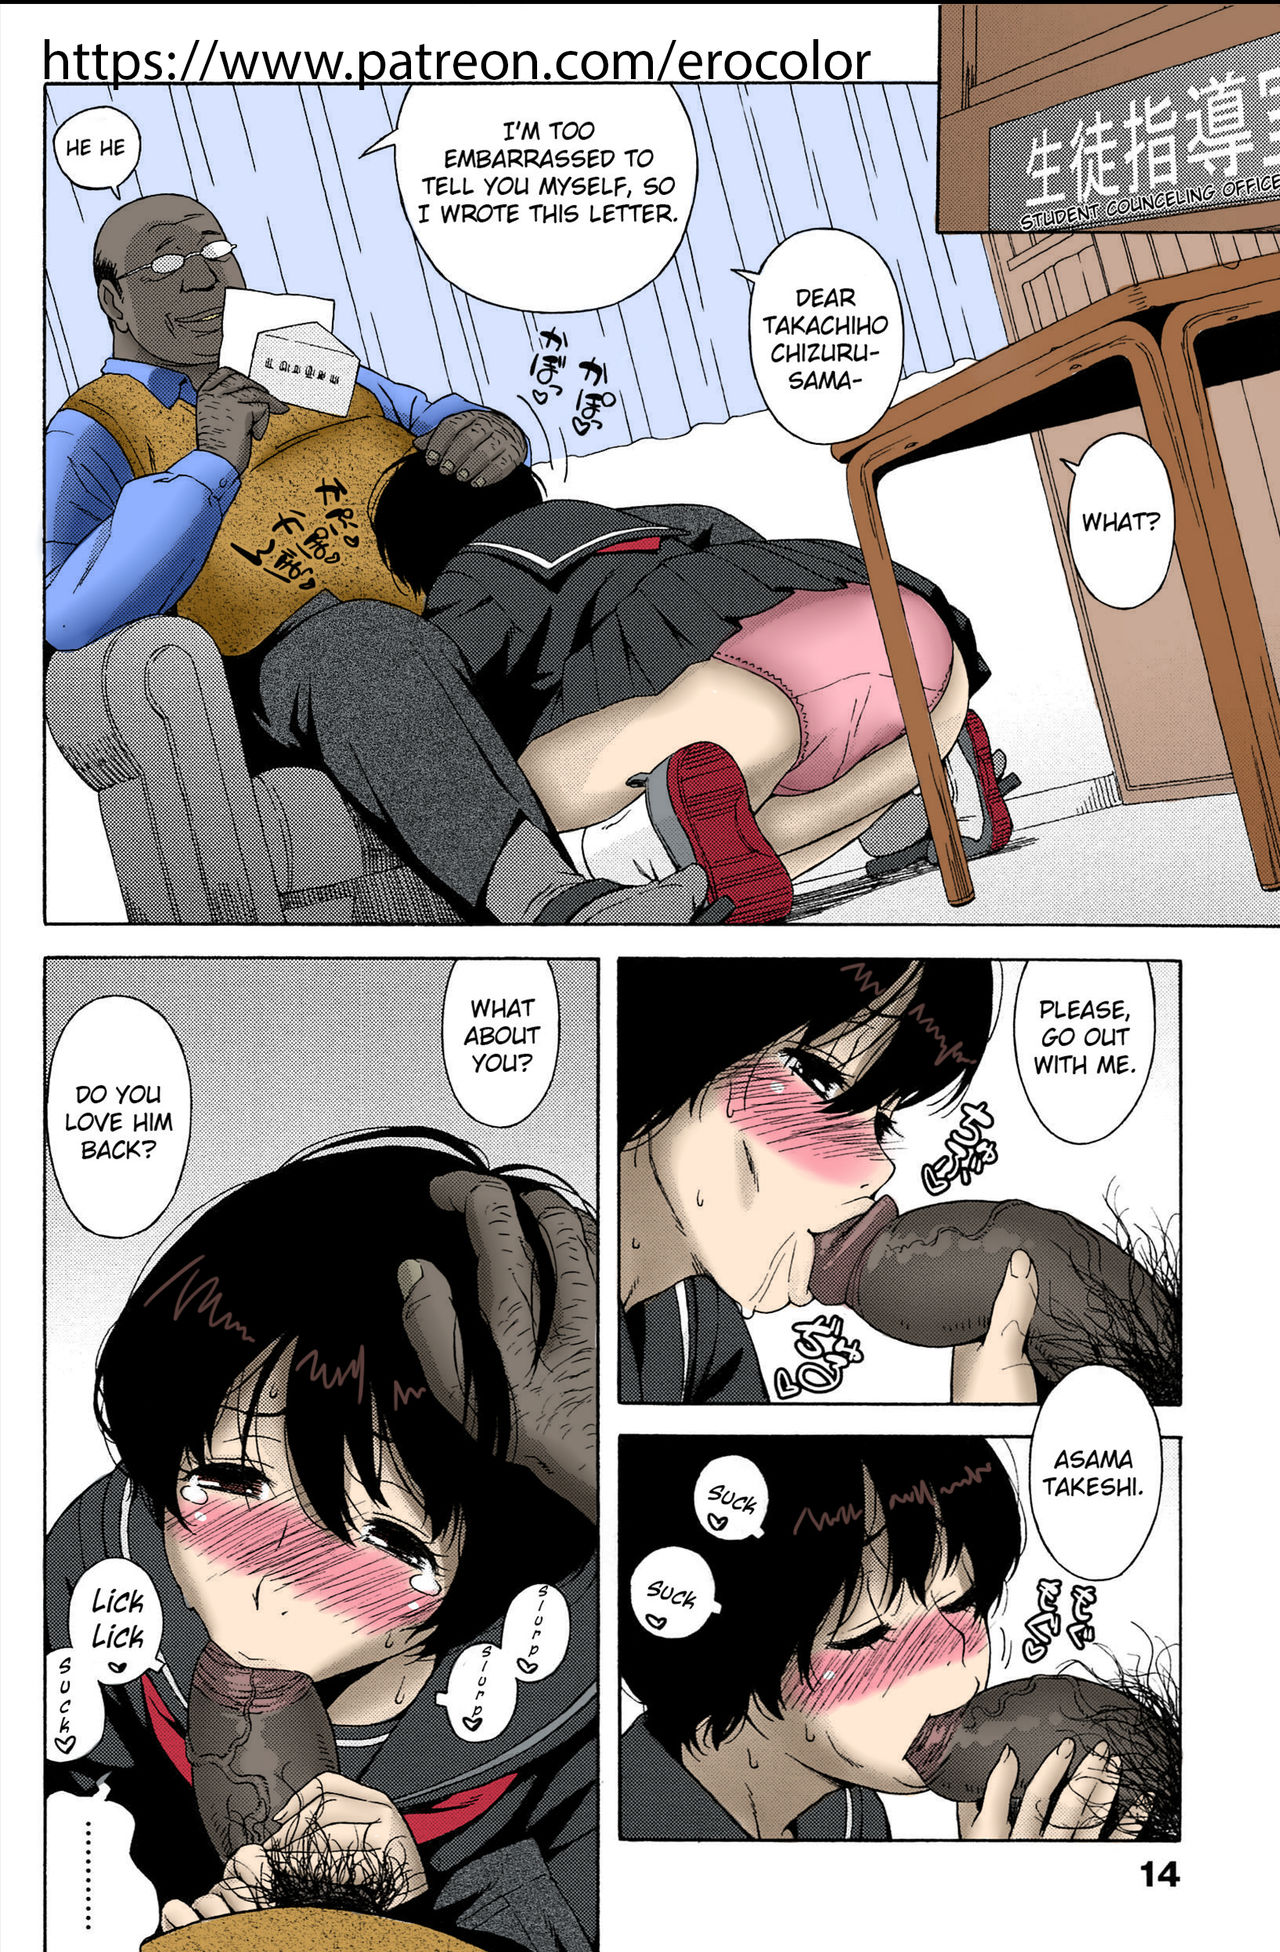 [Jingrock] Love Letter [Ongoing][English][Colorized][Erocolor] page 9 full